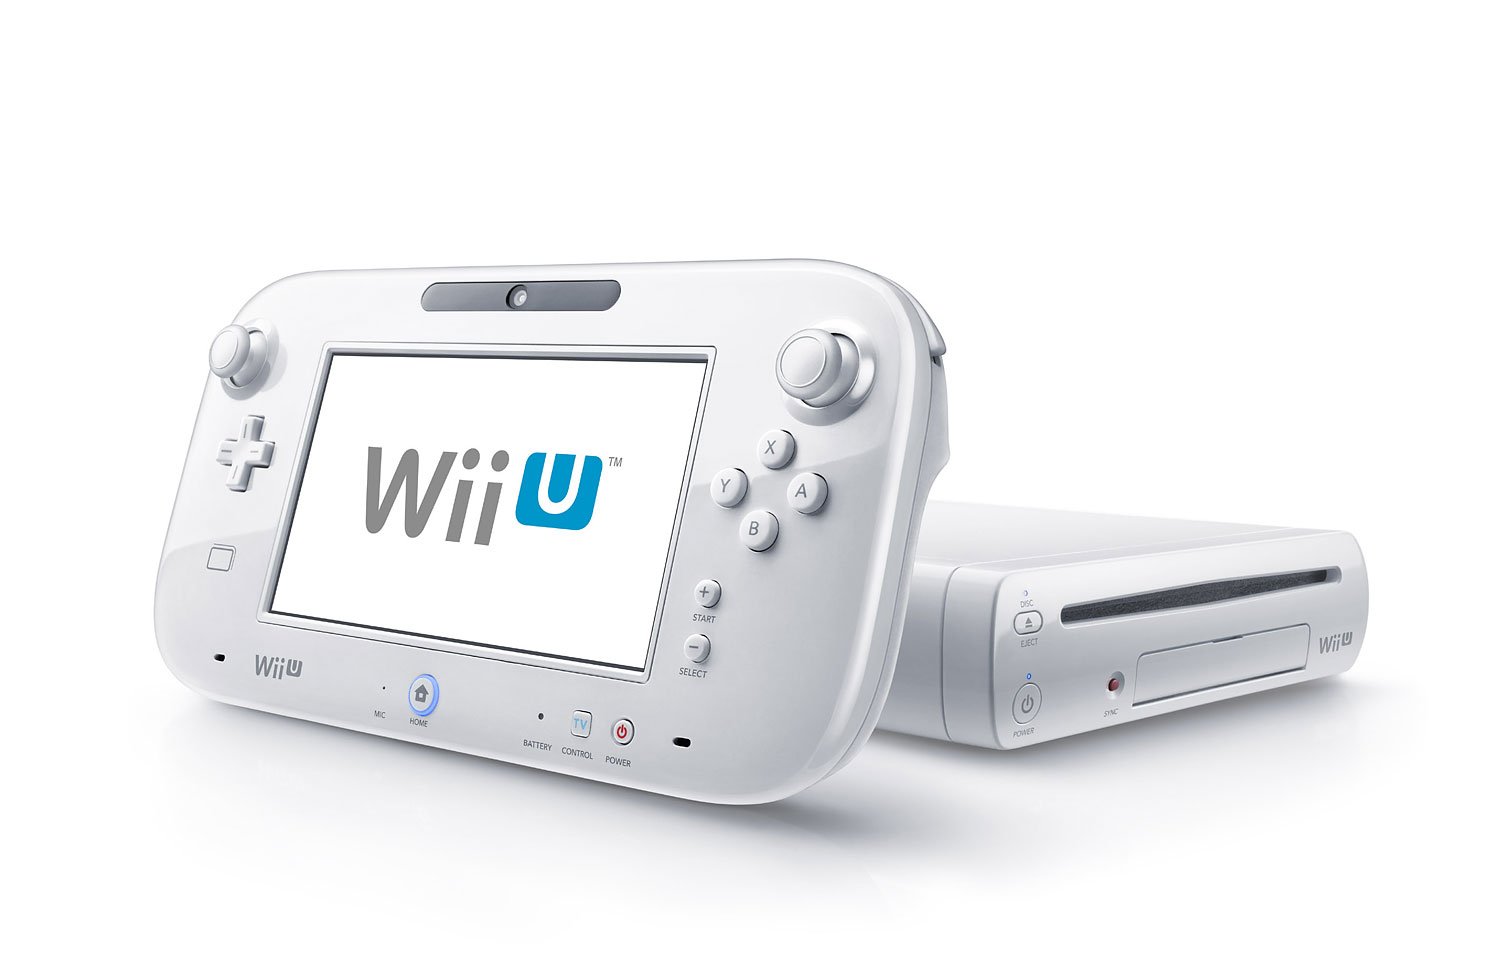 wii u games that can be played on gamepad